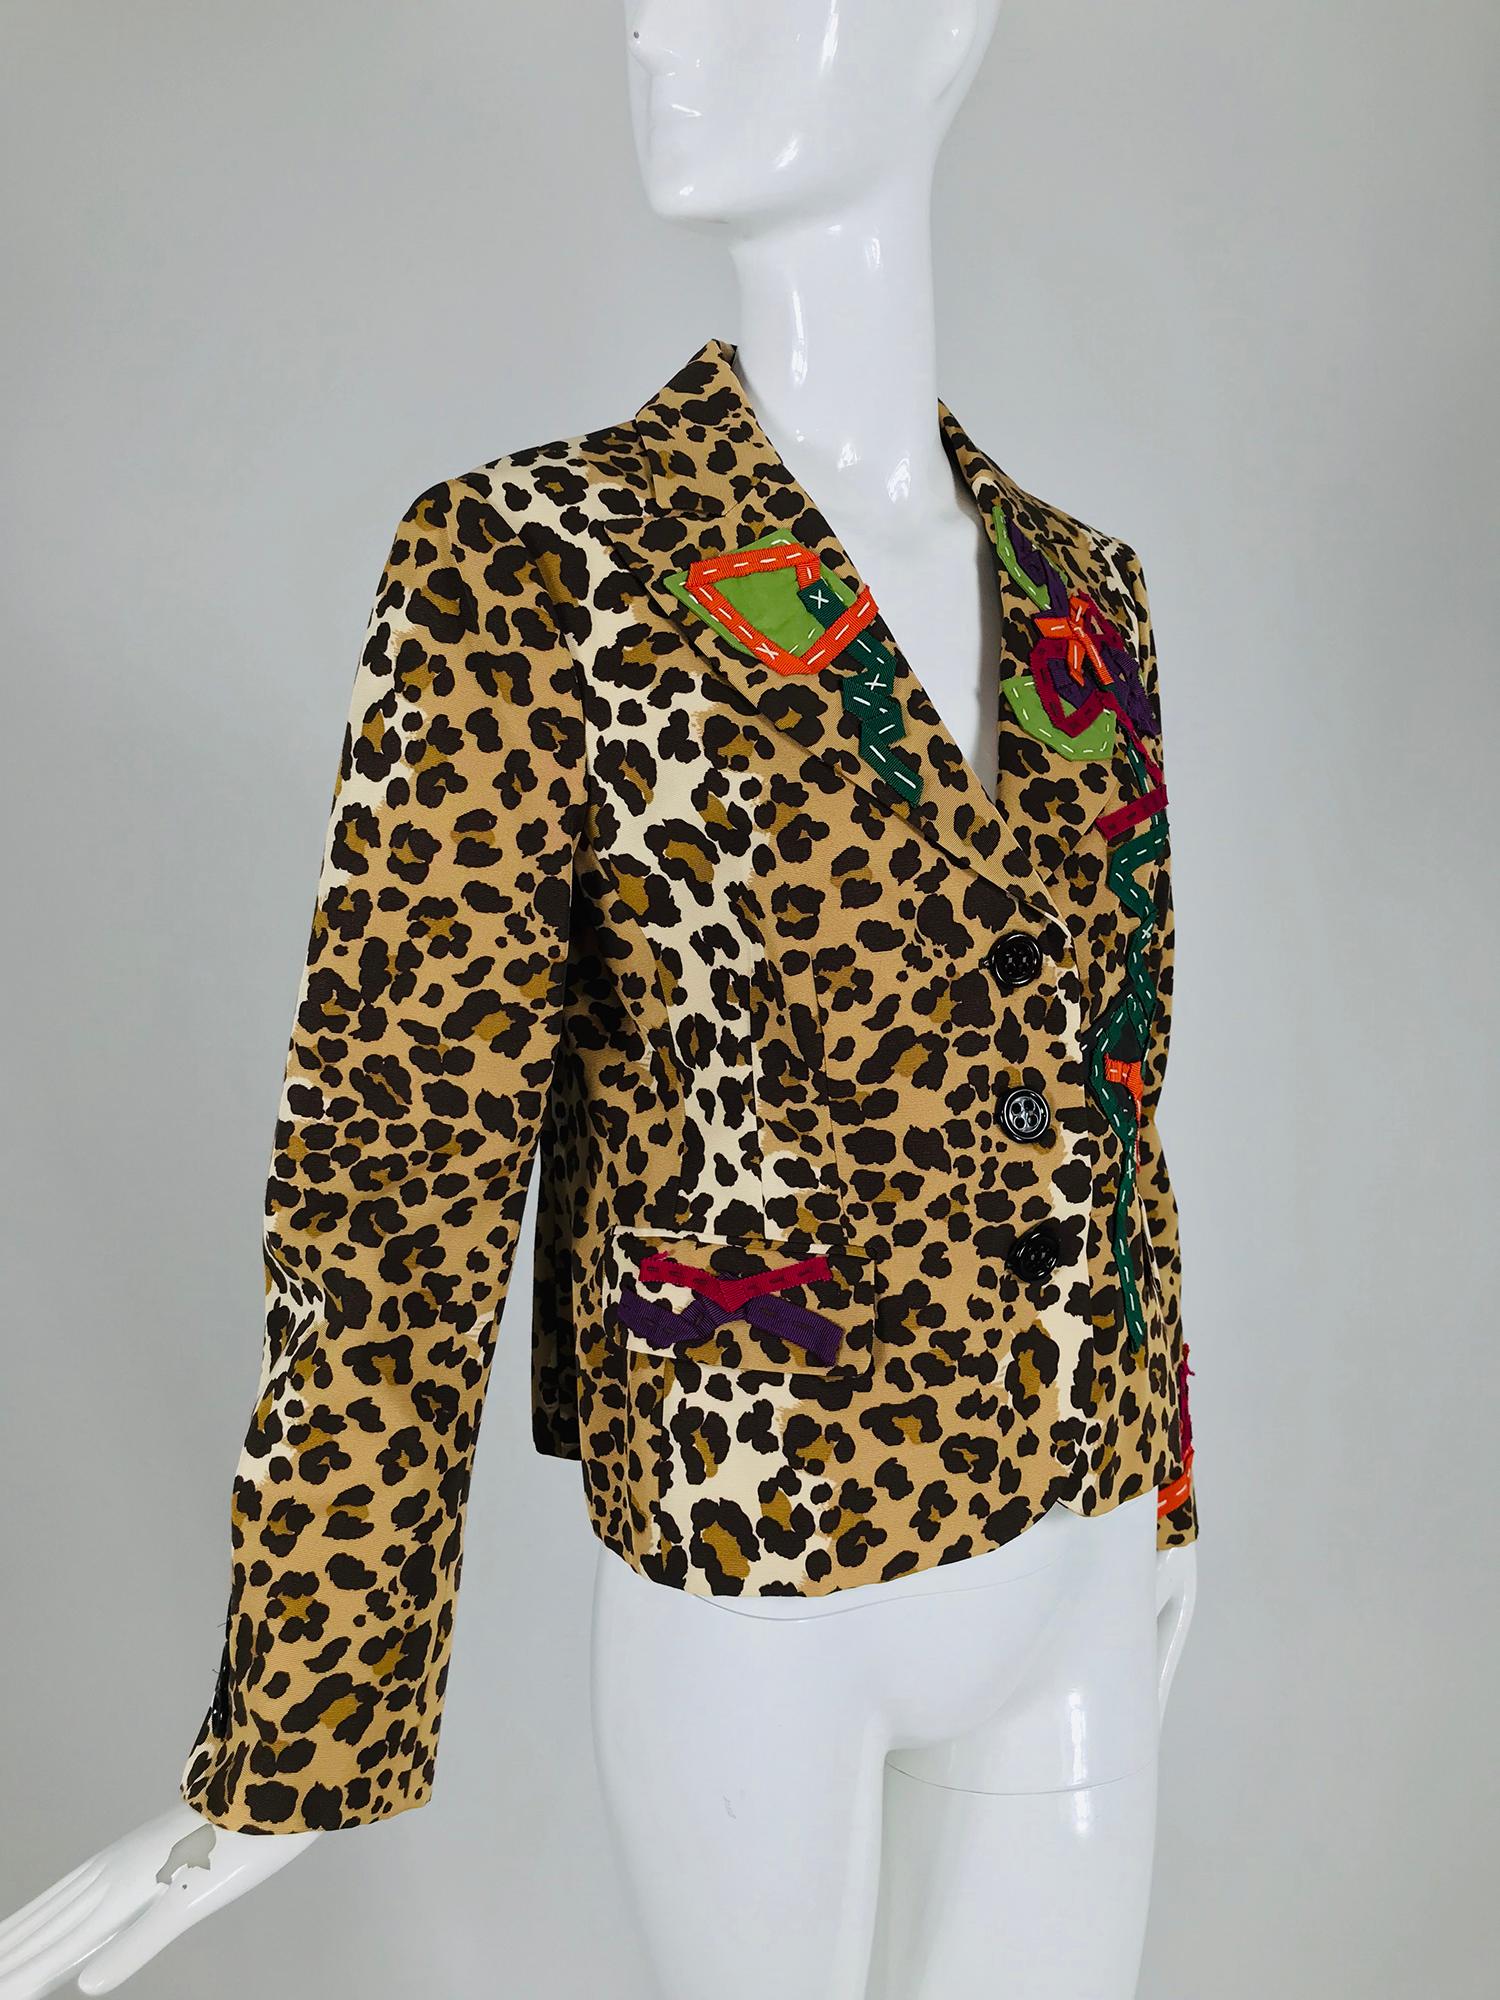 Moschino leopard print faille ribbon applique single breasted jacket. Leopard print faille, single breasted jacket with decorative flap pockets and beautiful coloured ribbon embroidery scattered here and there. Fully lined, closes at the front with